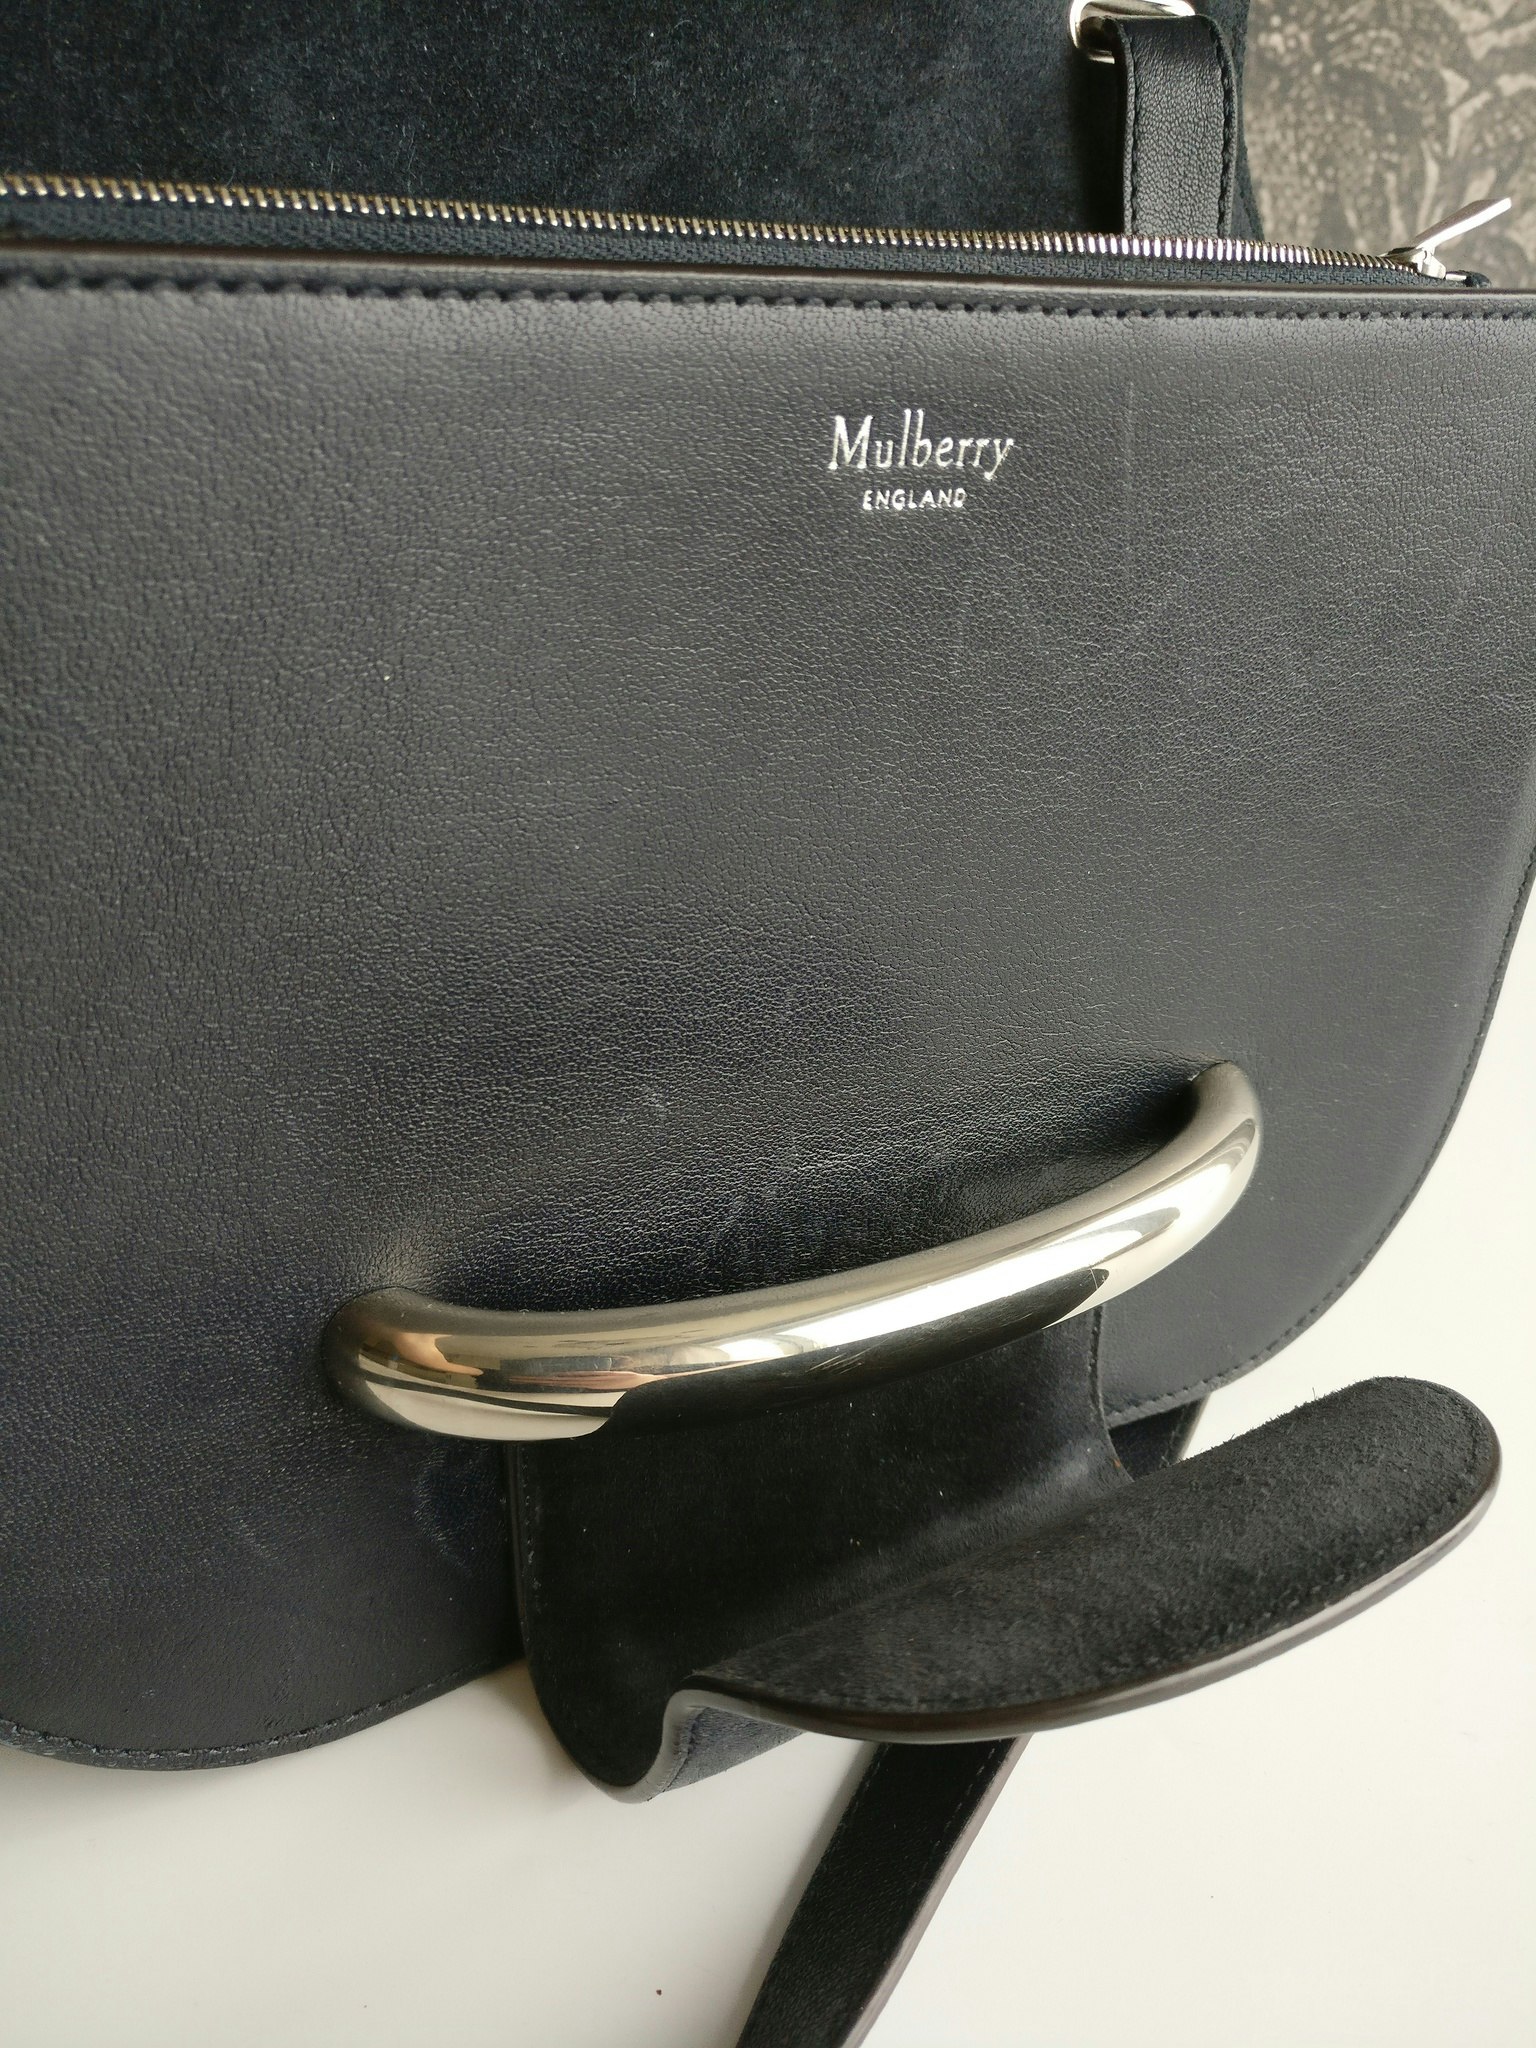 Mulberry Selwood